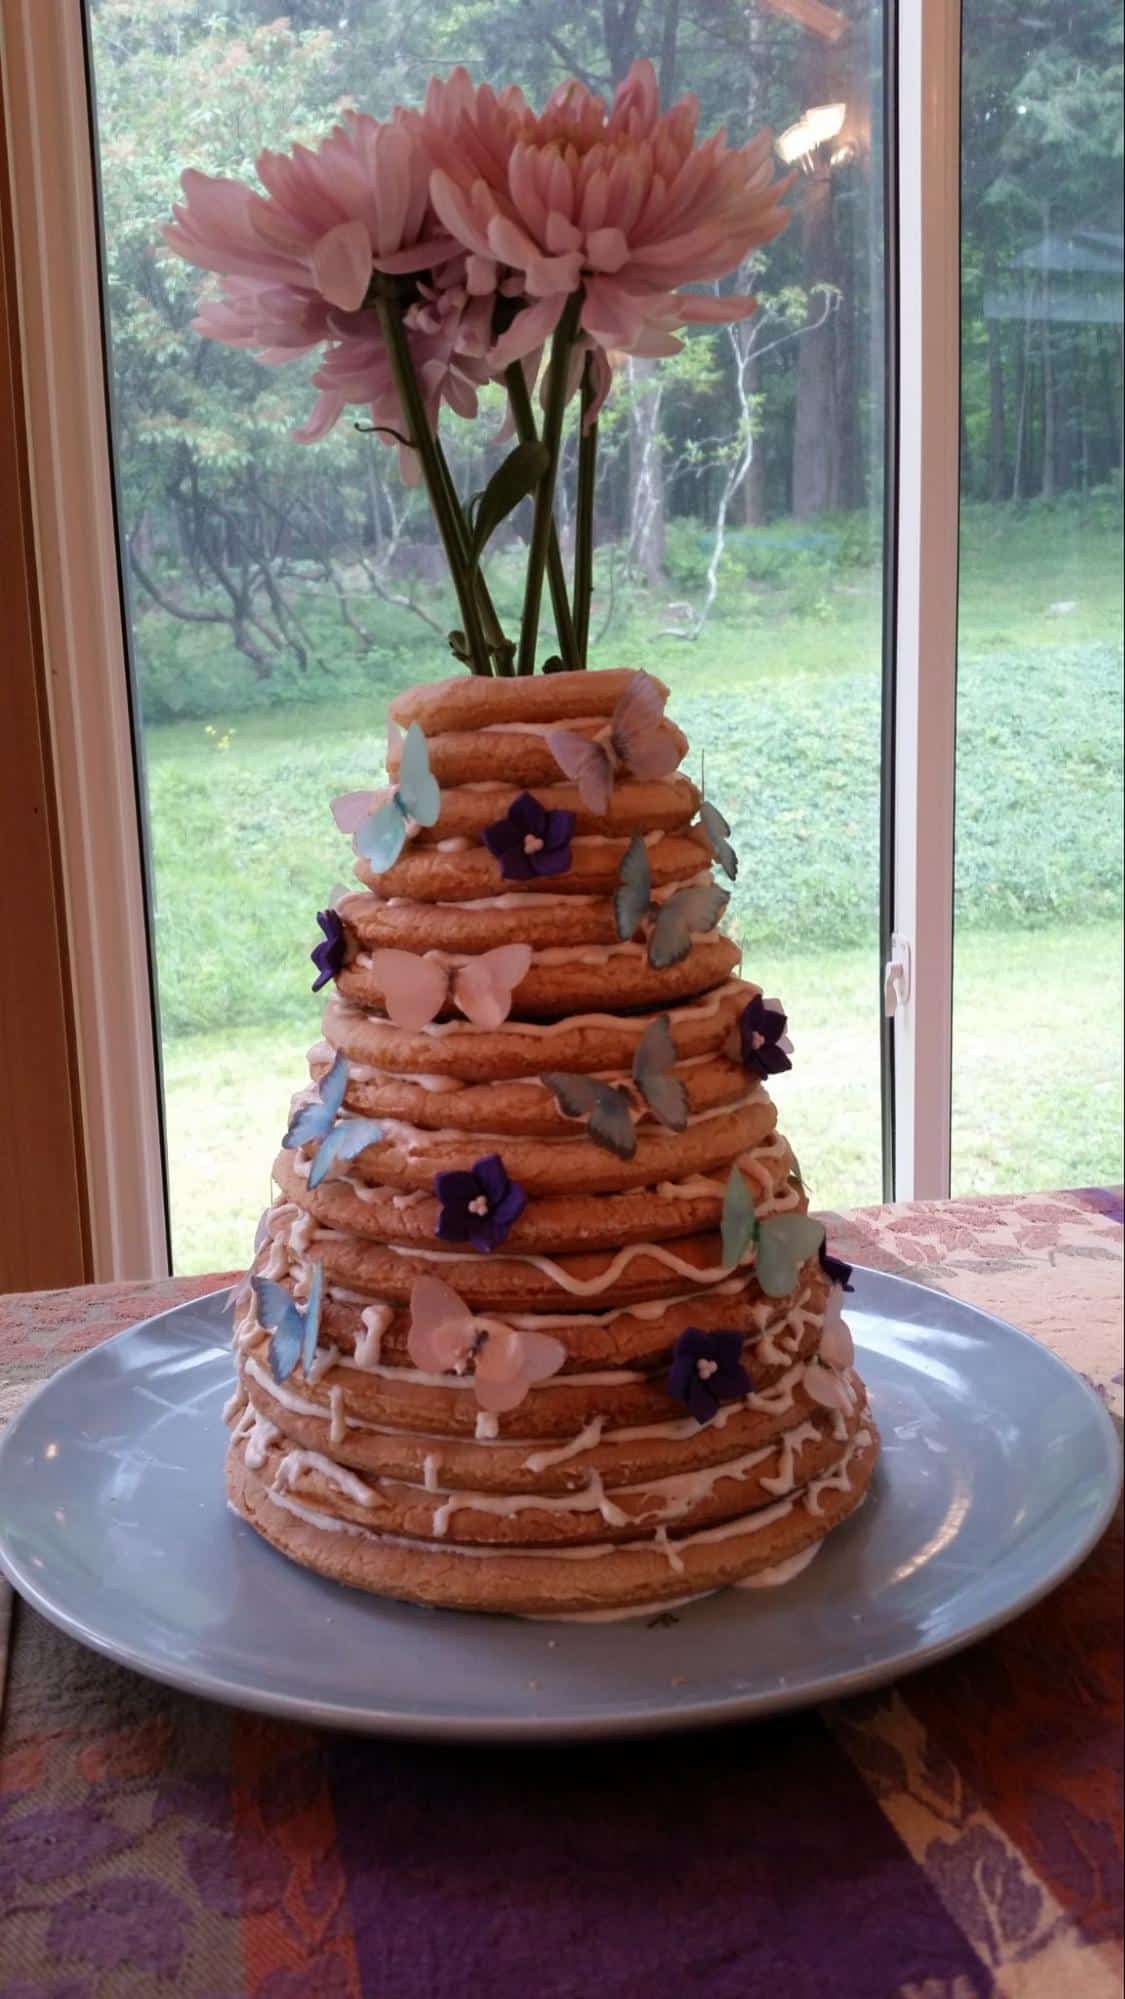 Photo of kransekeke: tall layered cake decorated with flowers and butterflies